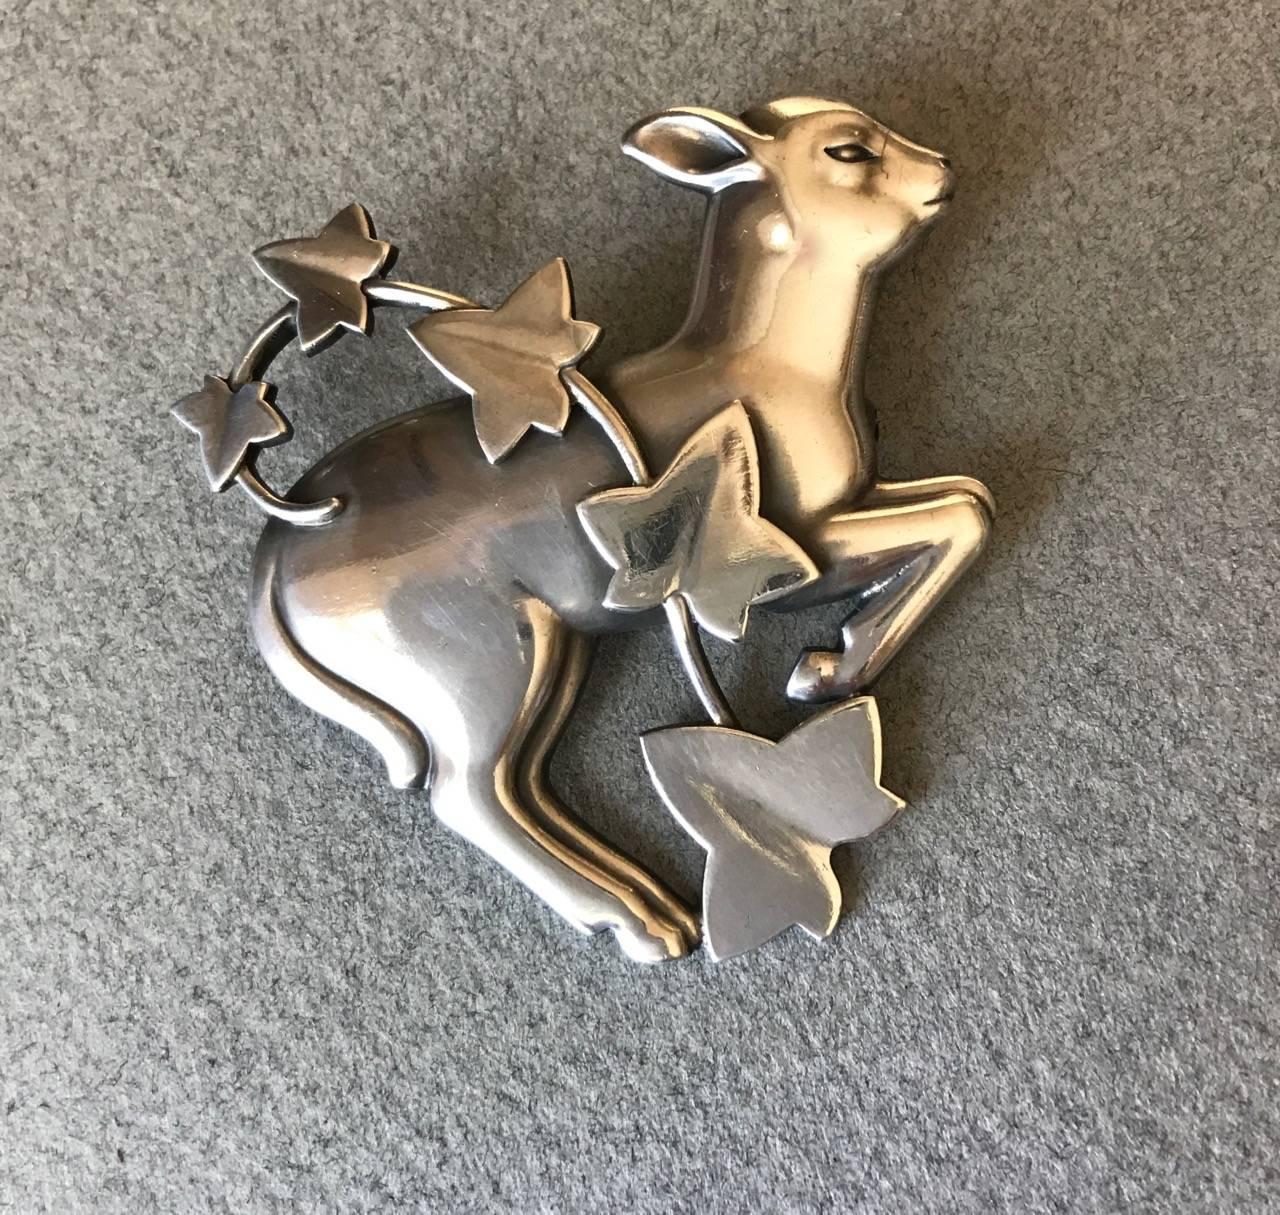 Georg Jensen Sterling Silver Lamb and Ivy Brooch No. 311 by Arno Malinowski

Highly sought-after design, rarely seen. Beautiful, original condition.

Complimentary gift box and FREE shipping included. 

About the designer:
Arno Malinowski